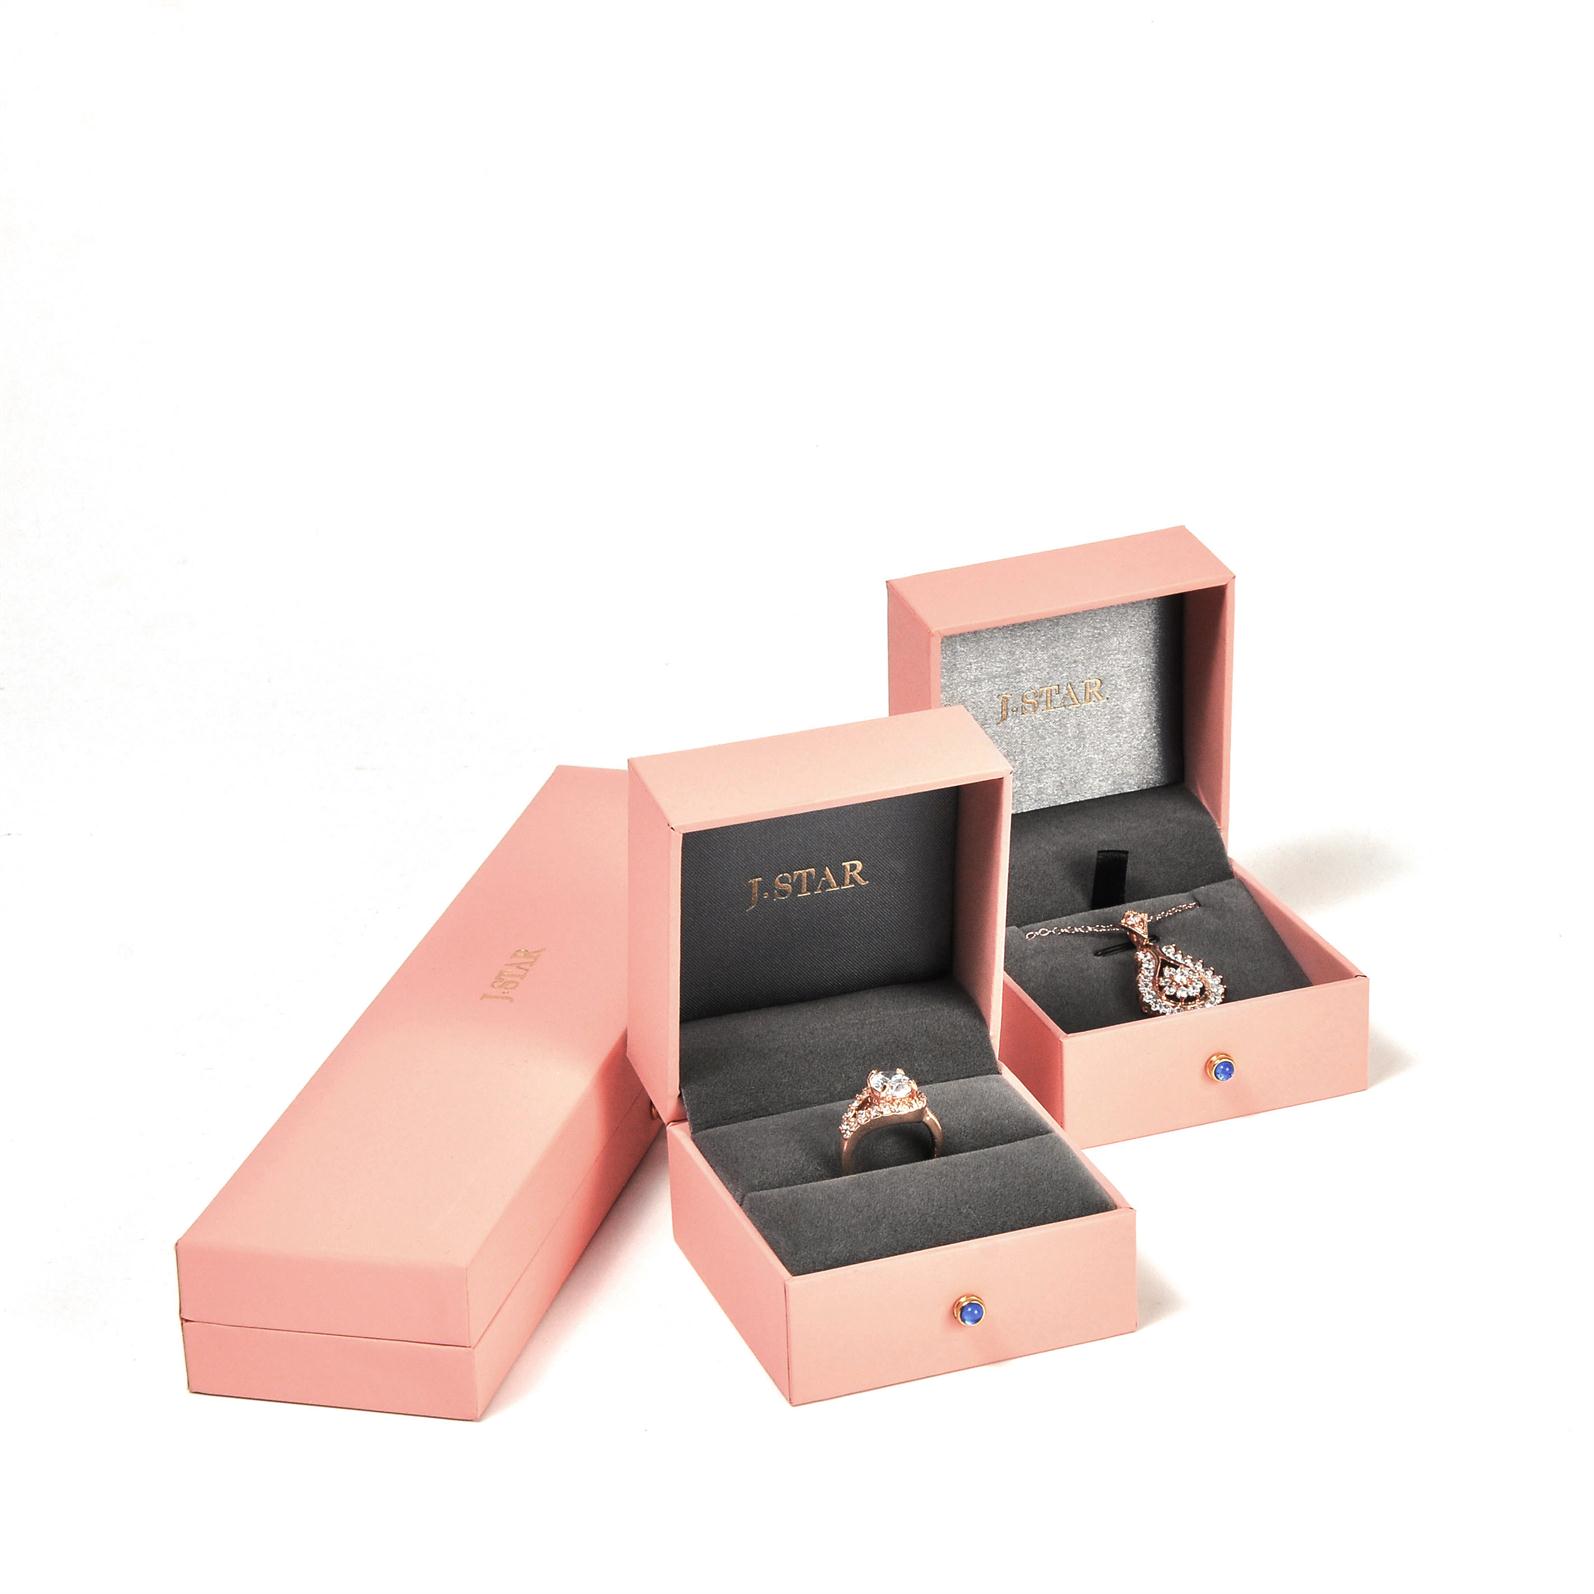 Hot-selling fashion- designed blush pink handmade customized plastic jewelry box sets for ring, earing,bangle, necklace and pendant